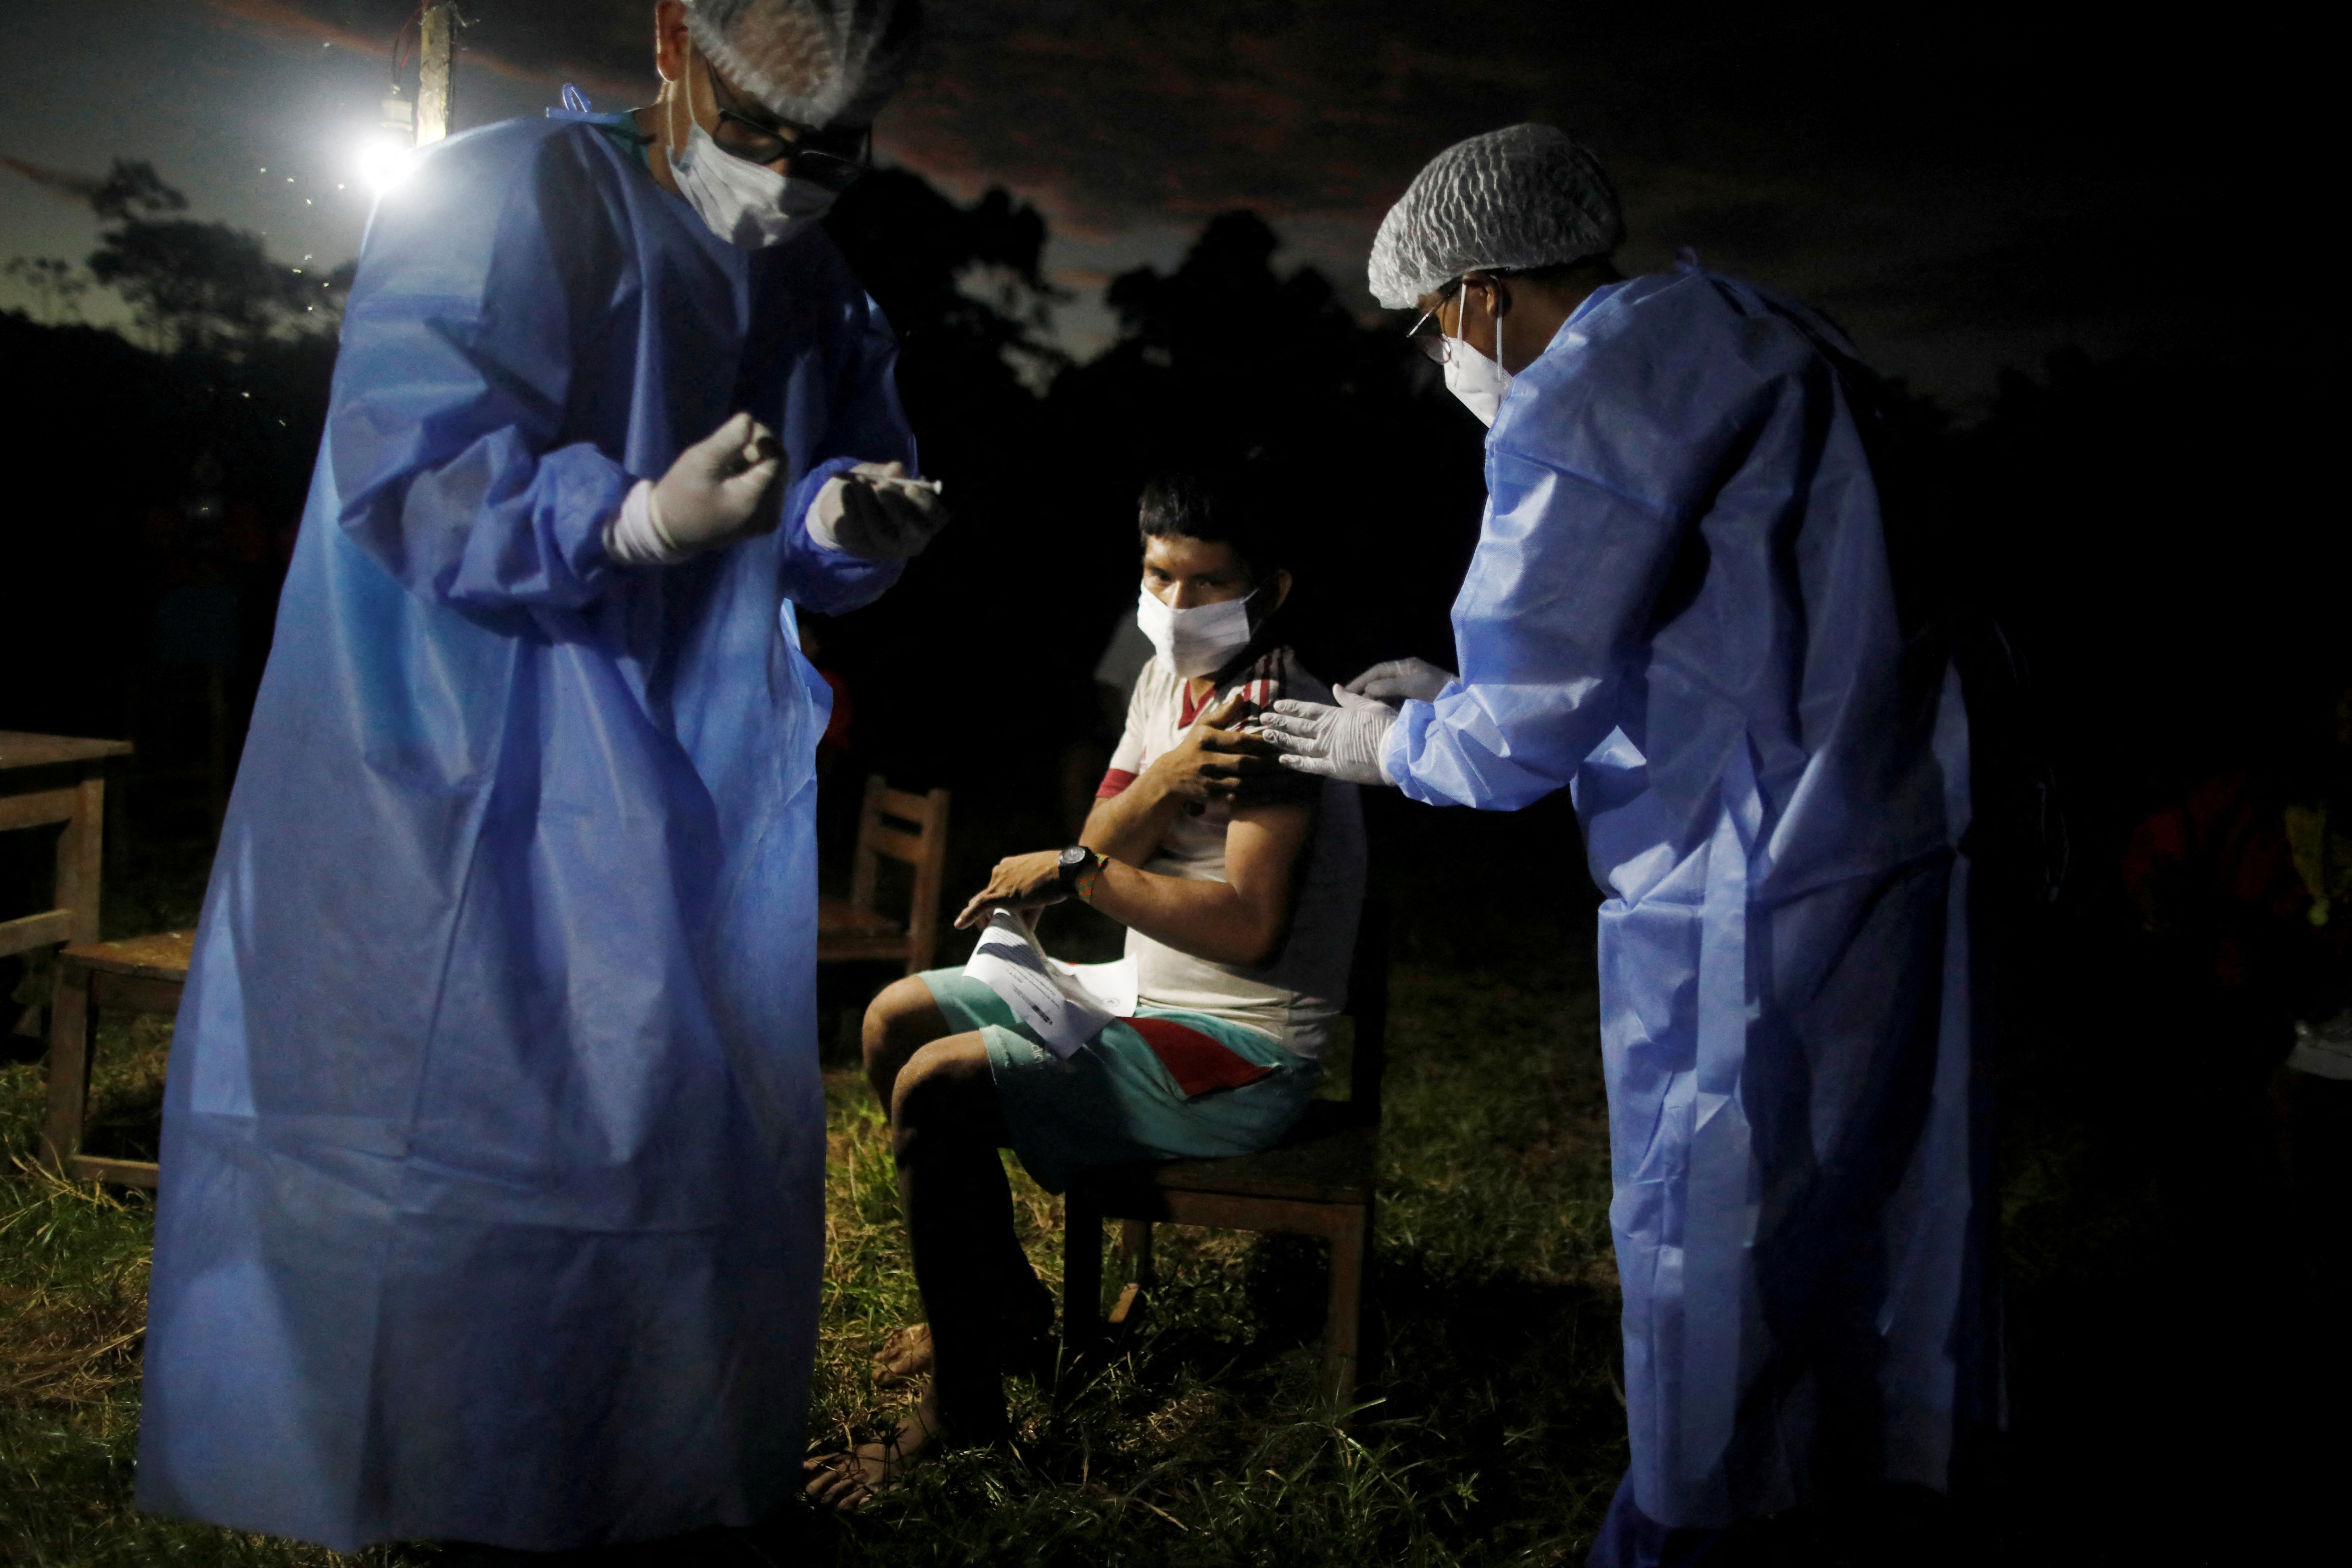 A man is administered a vaccine for the coronavirus disease (COVID-19) at night during an outreach by healthcare workers who traveled by river into the Amazon rainforest to educate people from the indigenous Urarina community about the disease and offer medical care, in San Marcos, Peru October 11, 2021. Picture taken October 11, 2021. REUTERS/Sebastian Castaneda/File Photo